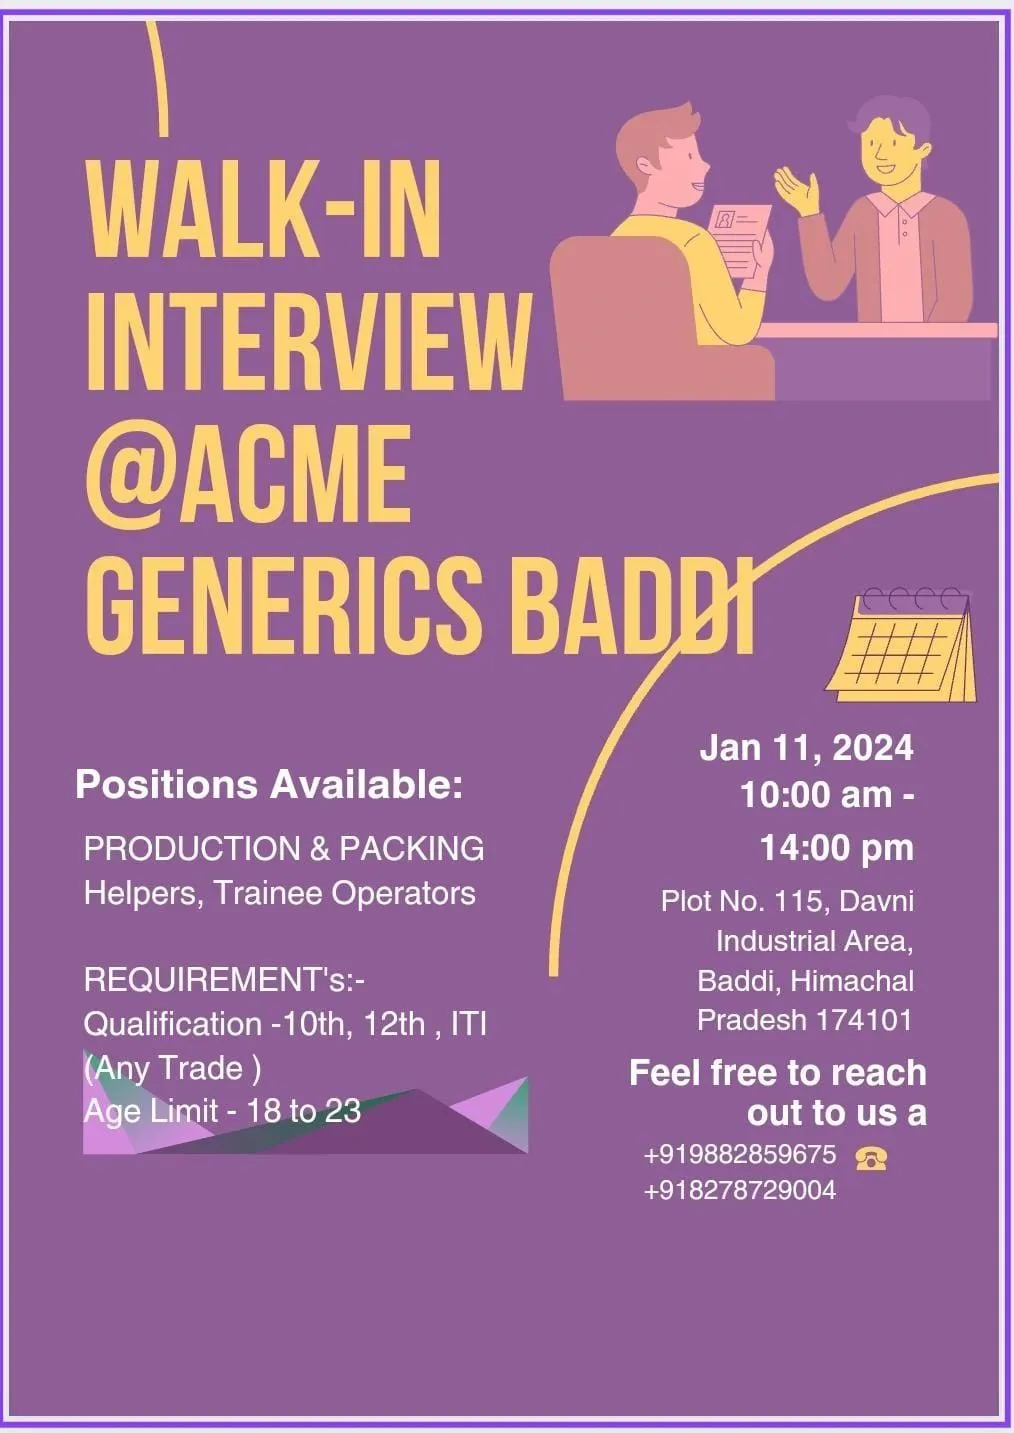 Acme Generics - Walk-In Interview for FRESHERS on 11th Jan 2024